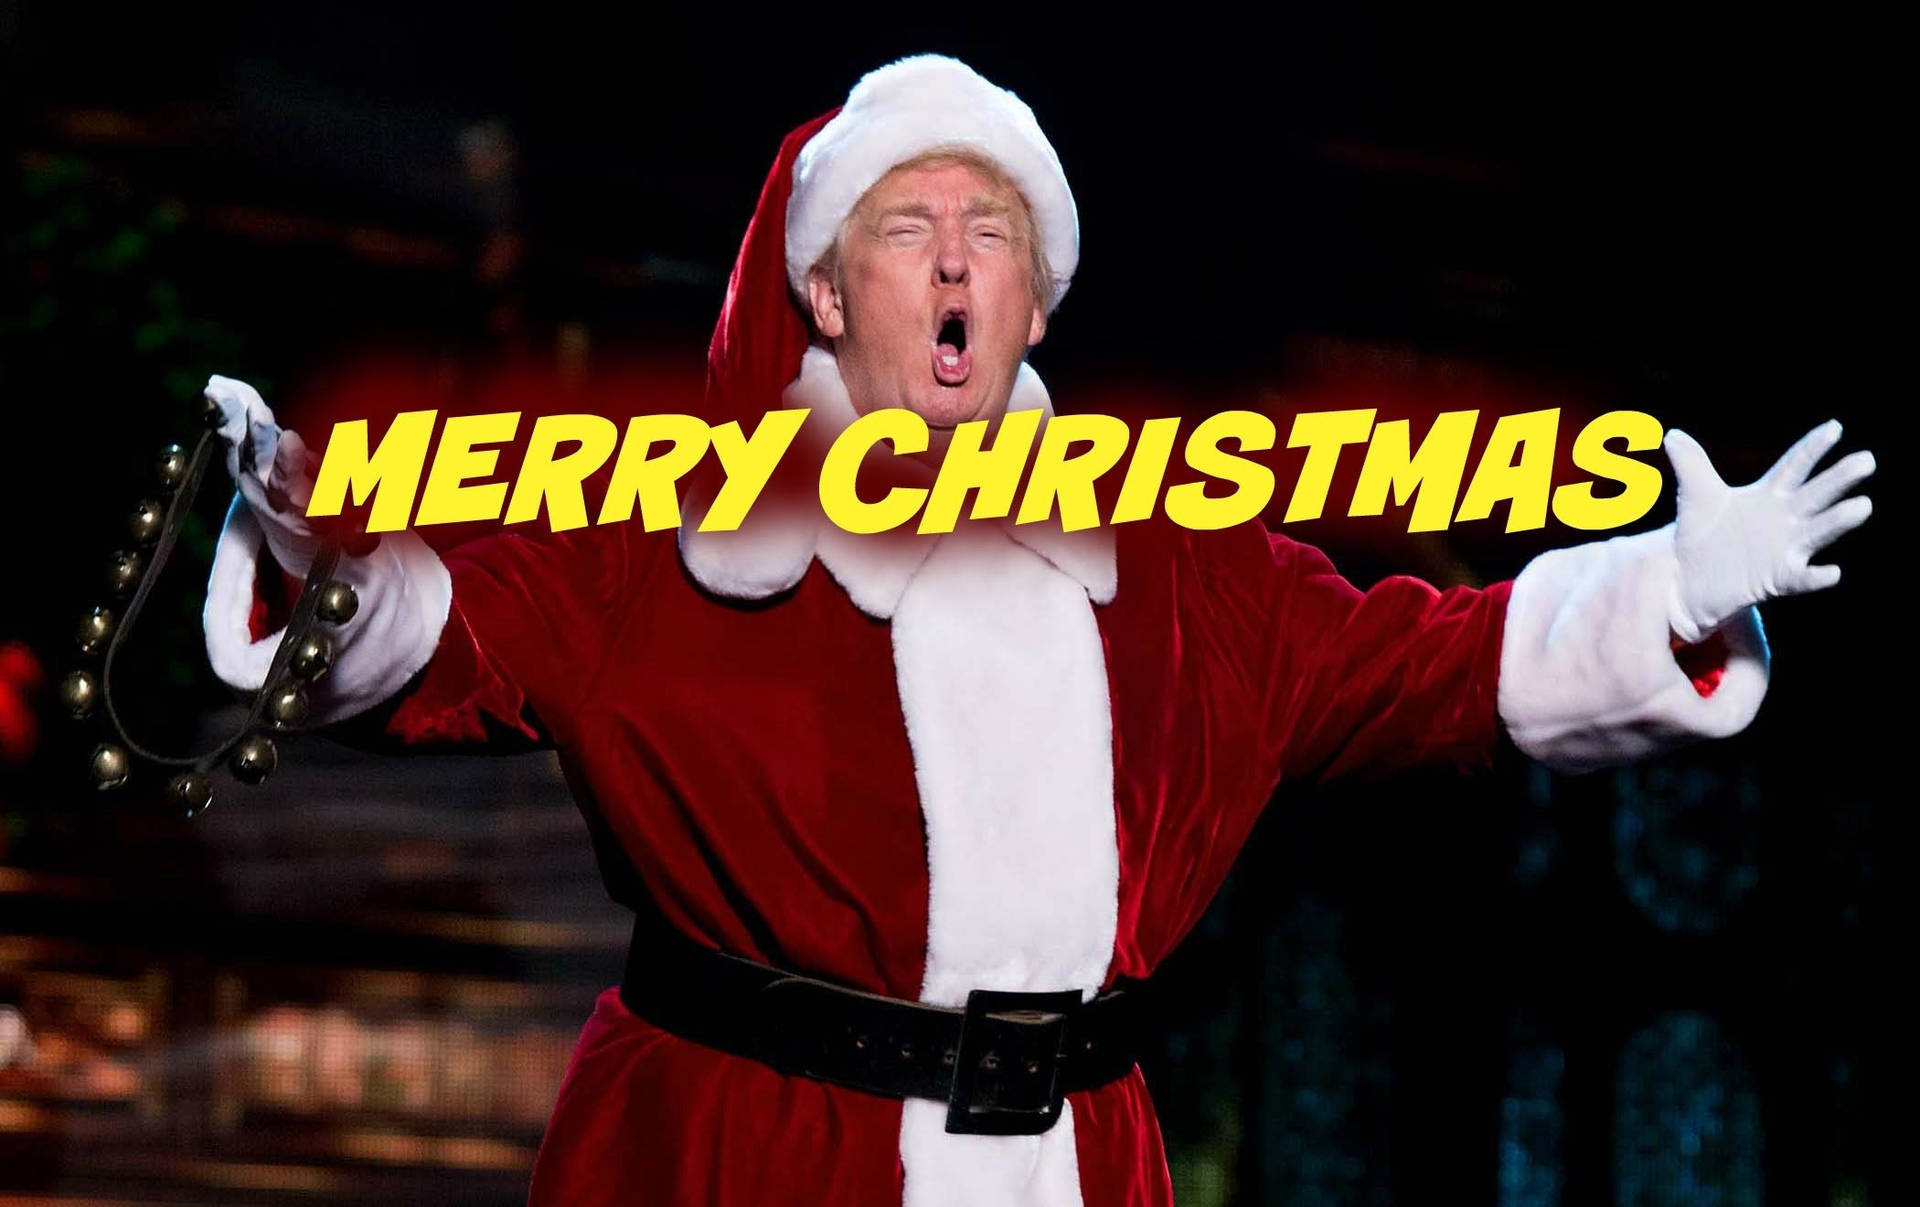 Spread the joy of Christmas with President Trump this holiday season! Wallpaper